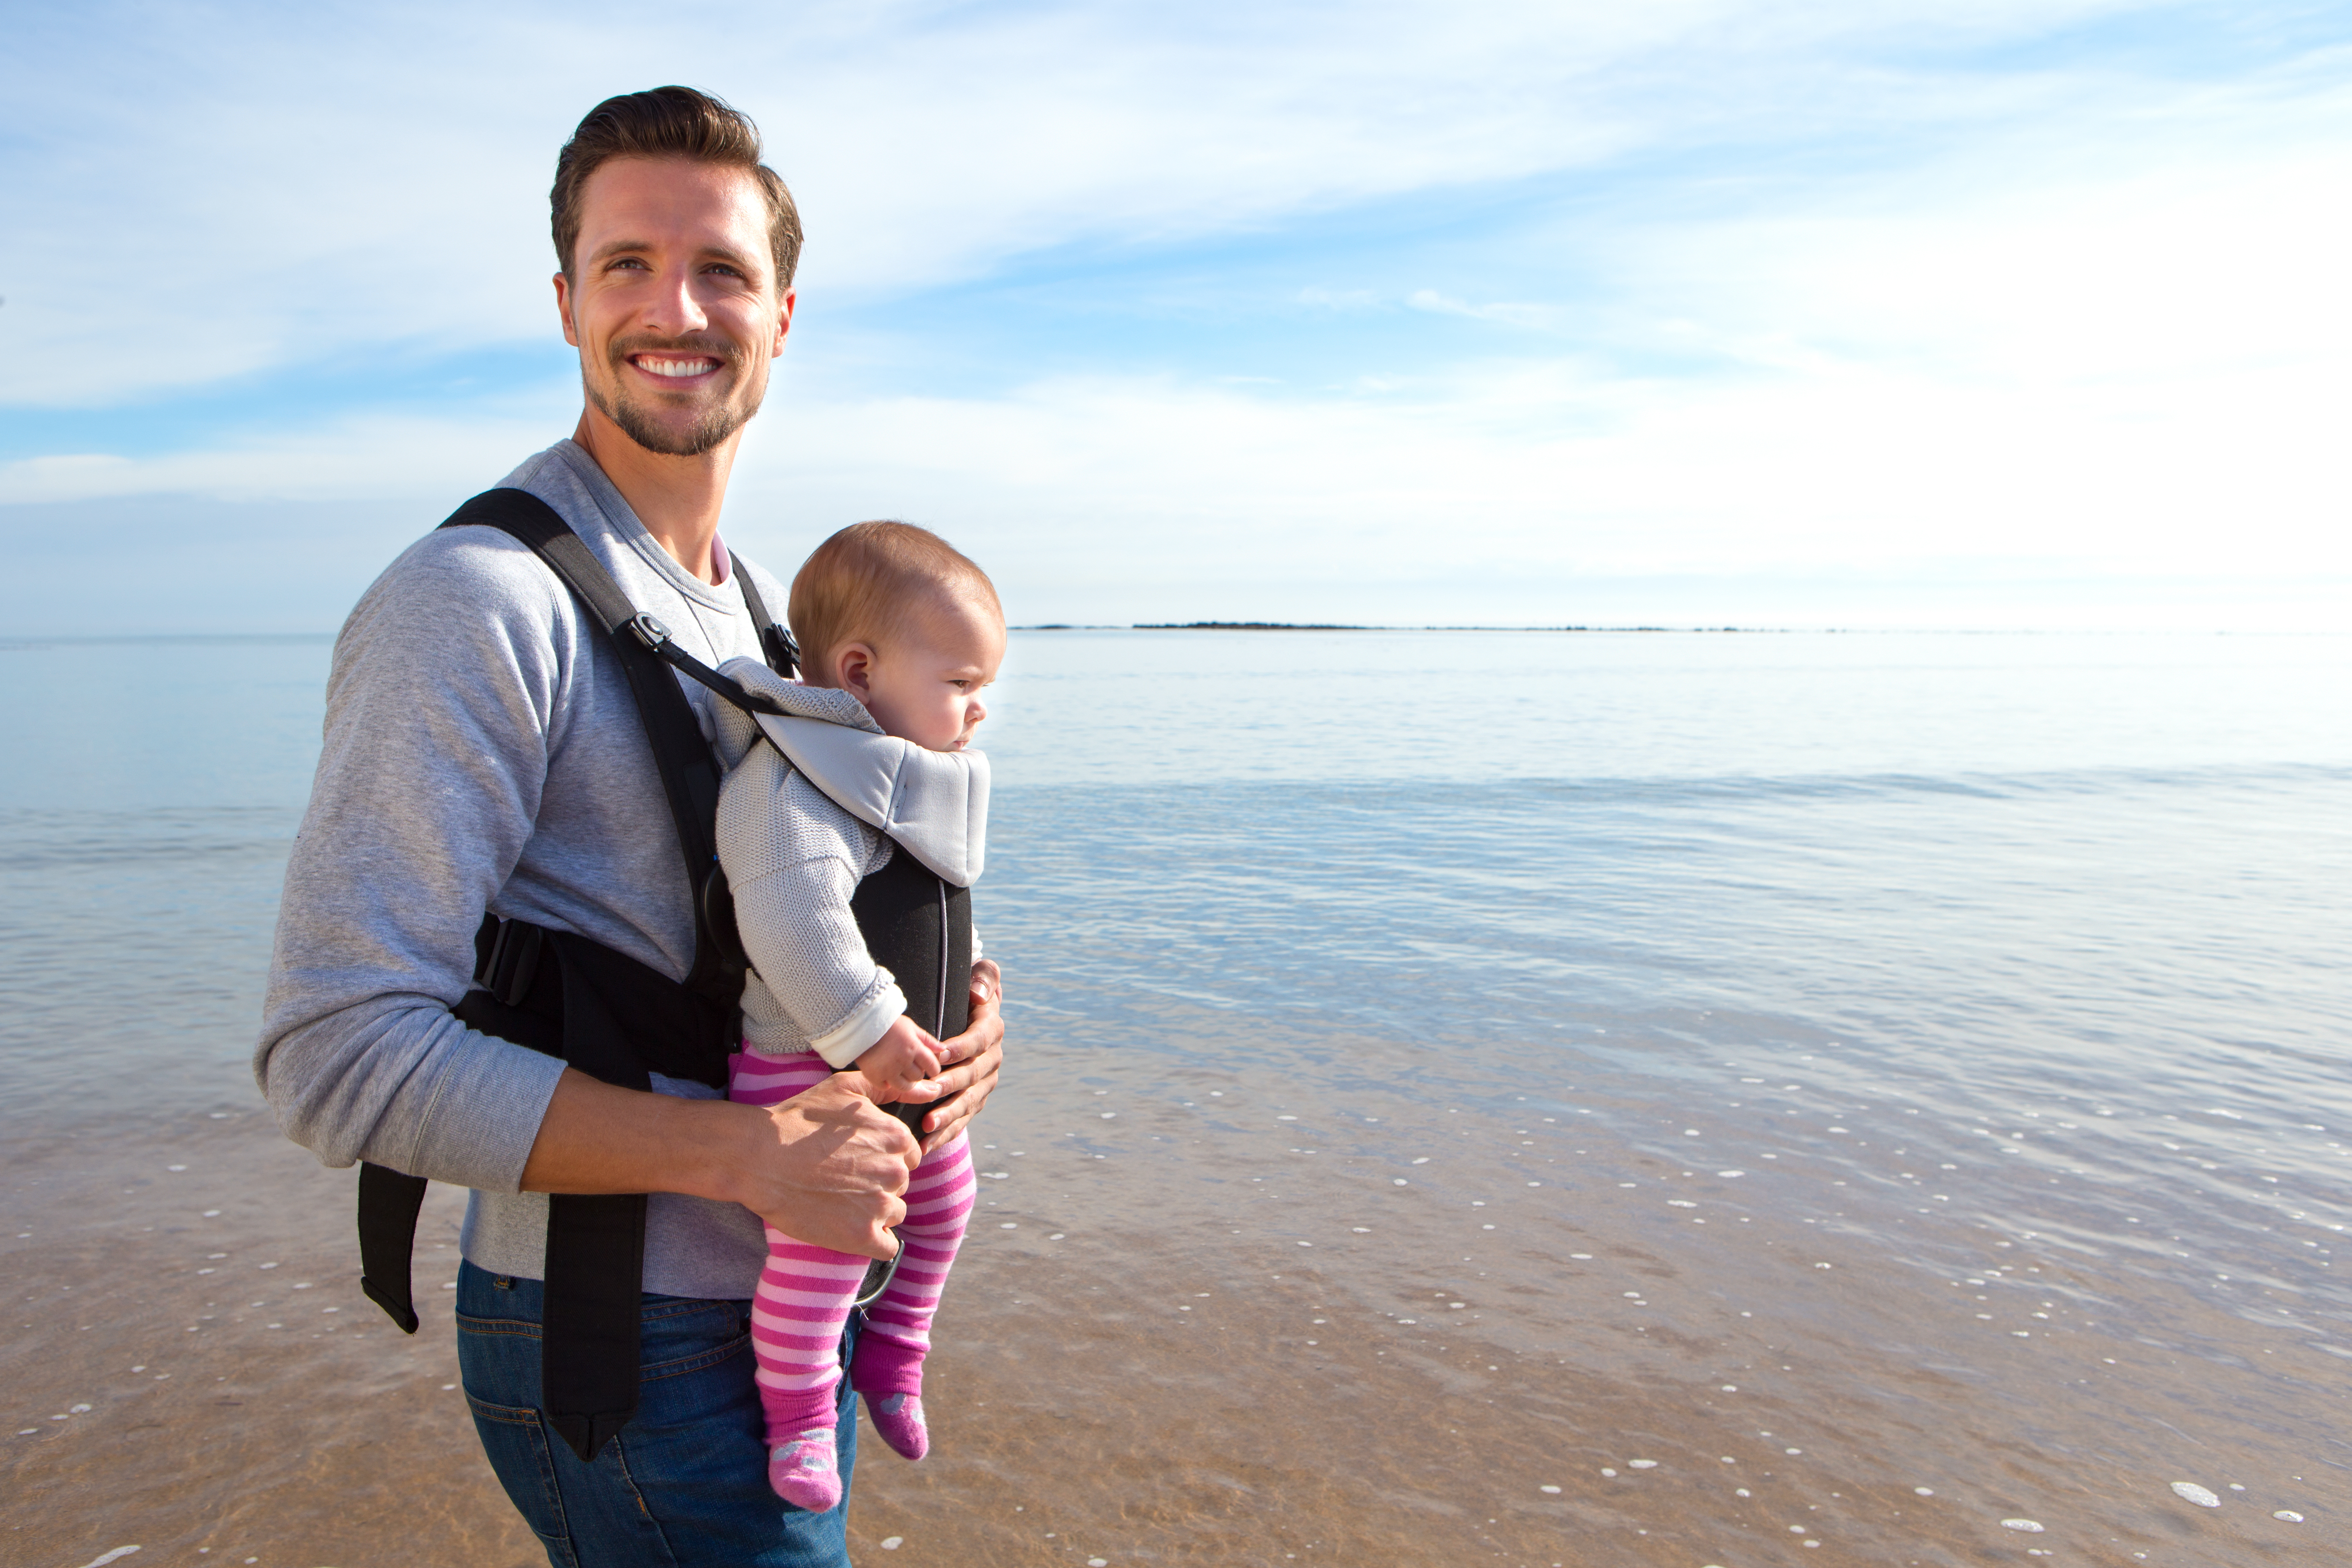 Dad at the beach holing his baby in a baby carrier